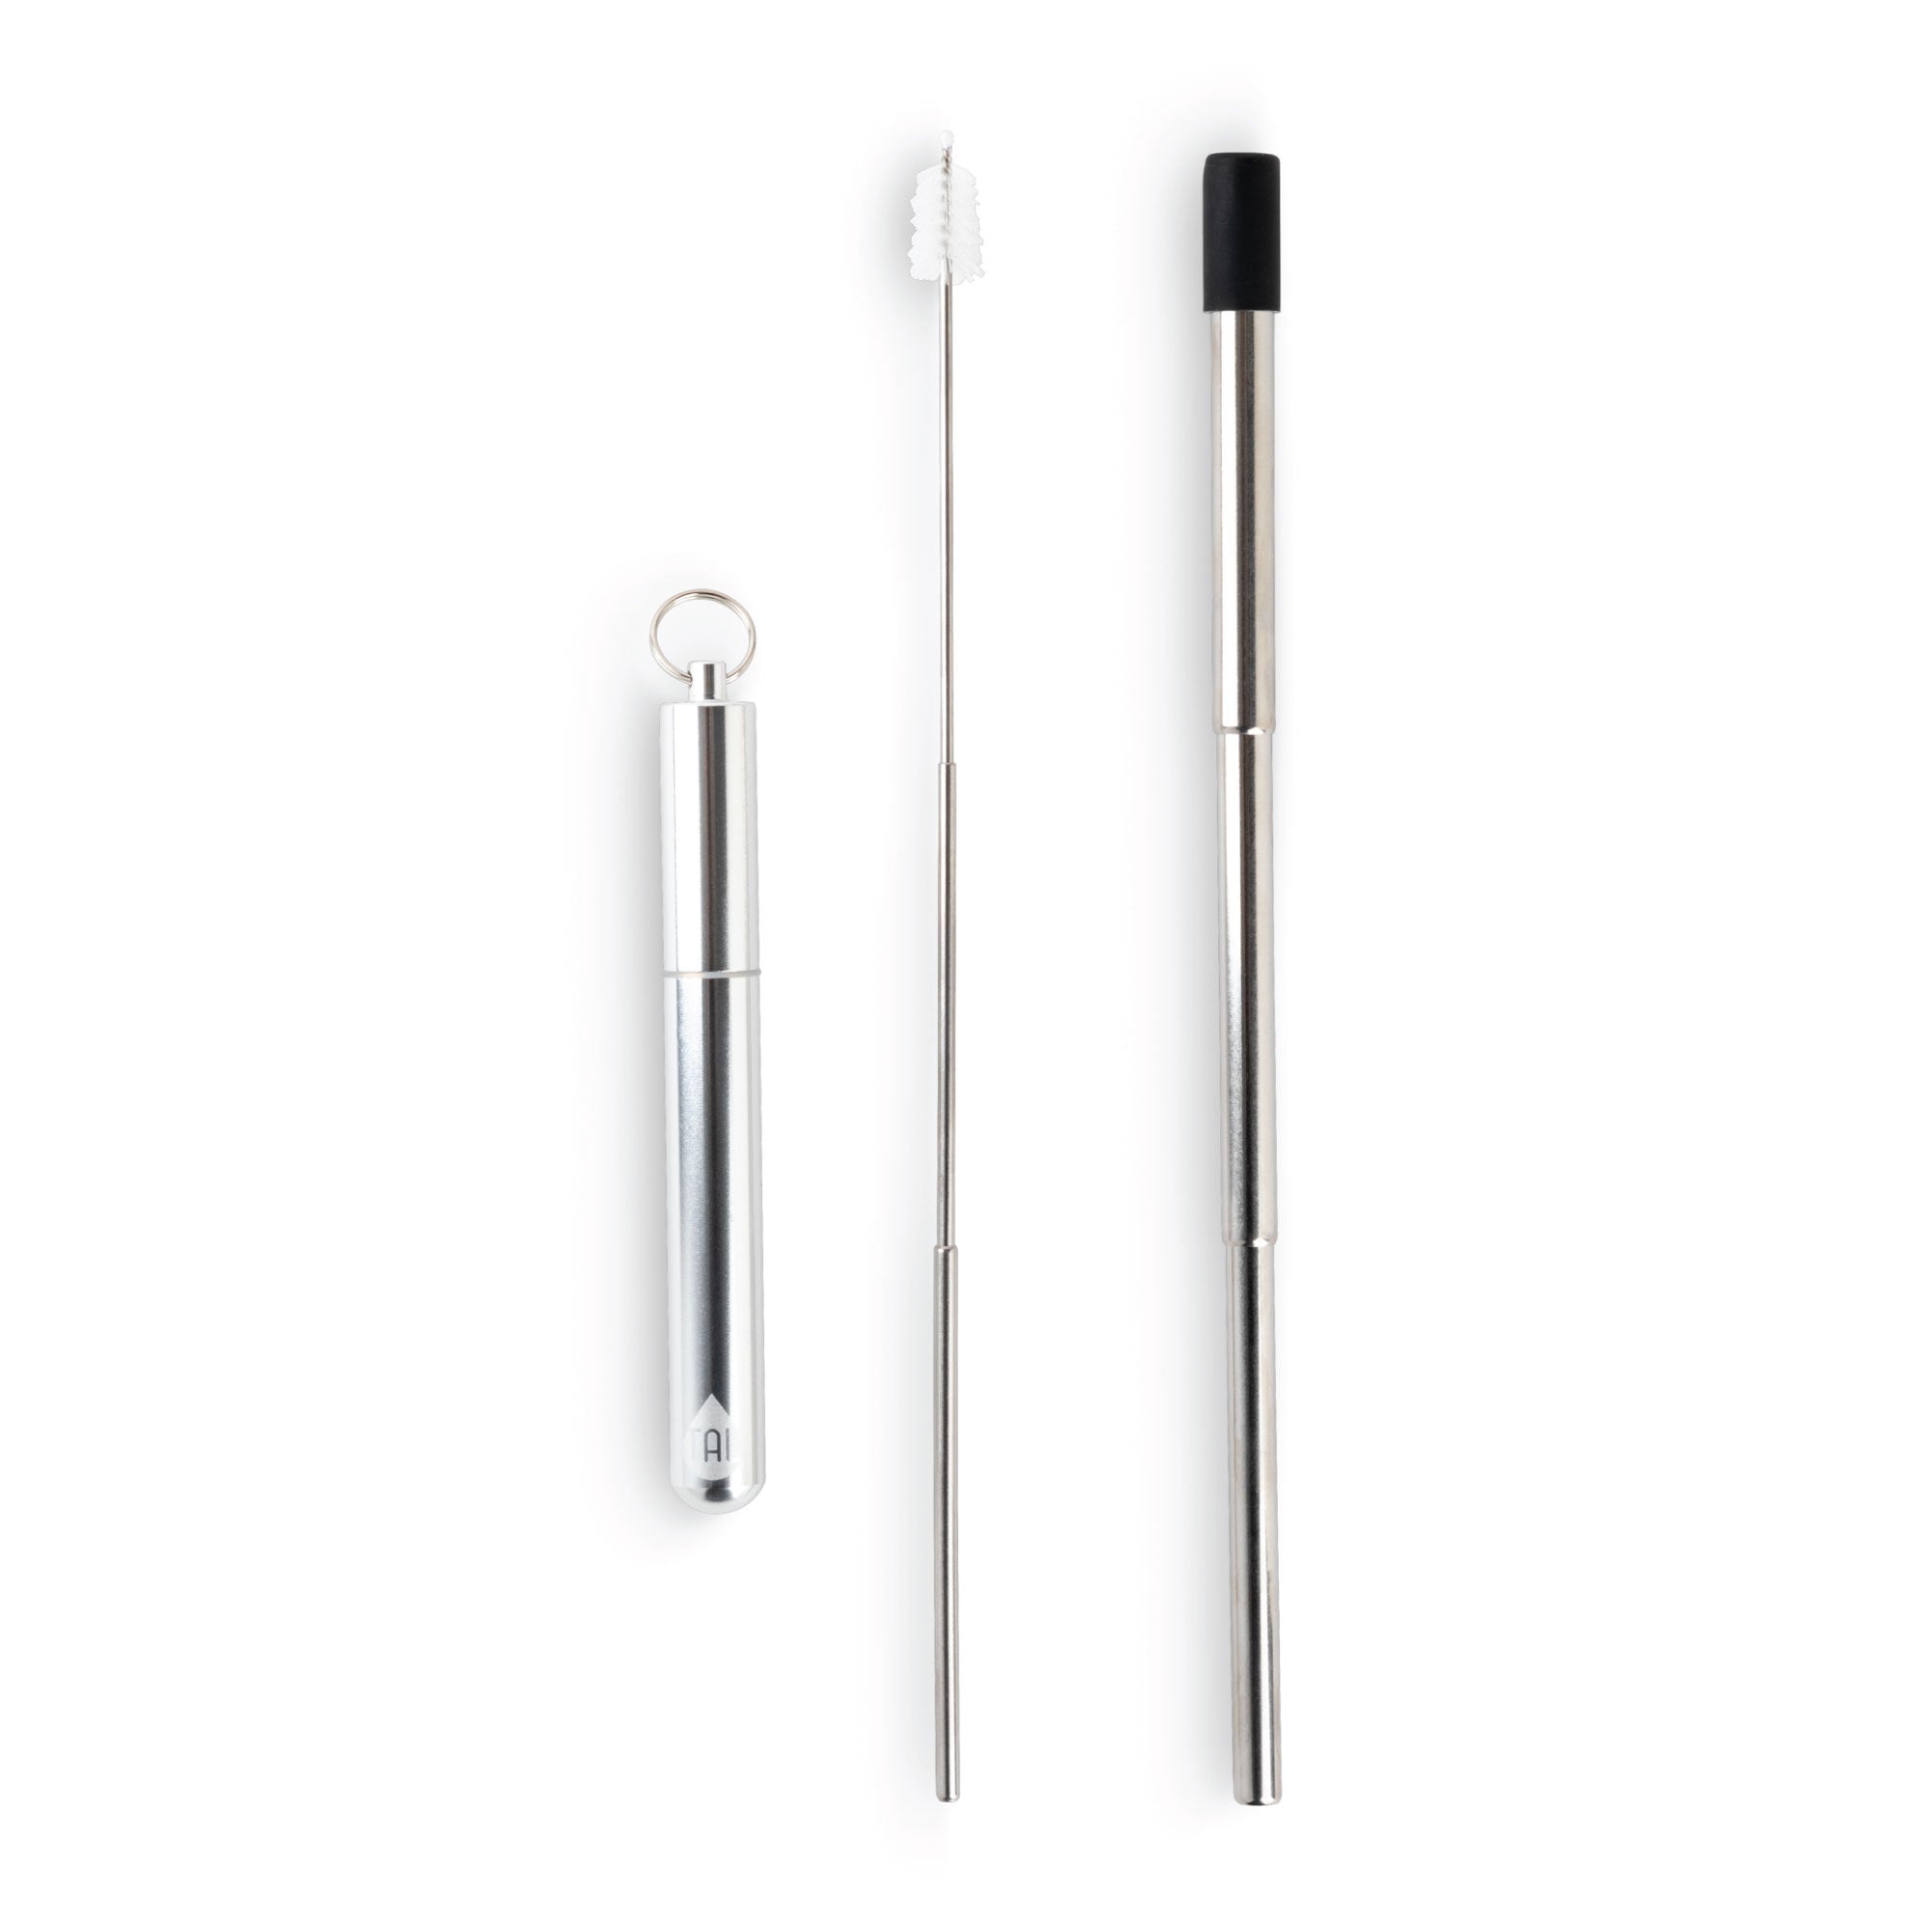 Magazine New Stainless Steel Straws Telescopic Straw Color Three-Section Drinking Straws with Aluminum Alloy Storage Tube Sleeve Blue Steel Straws